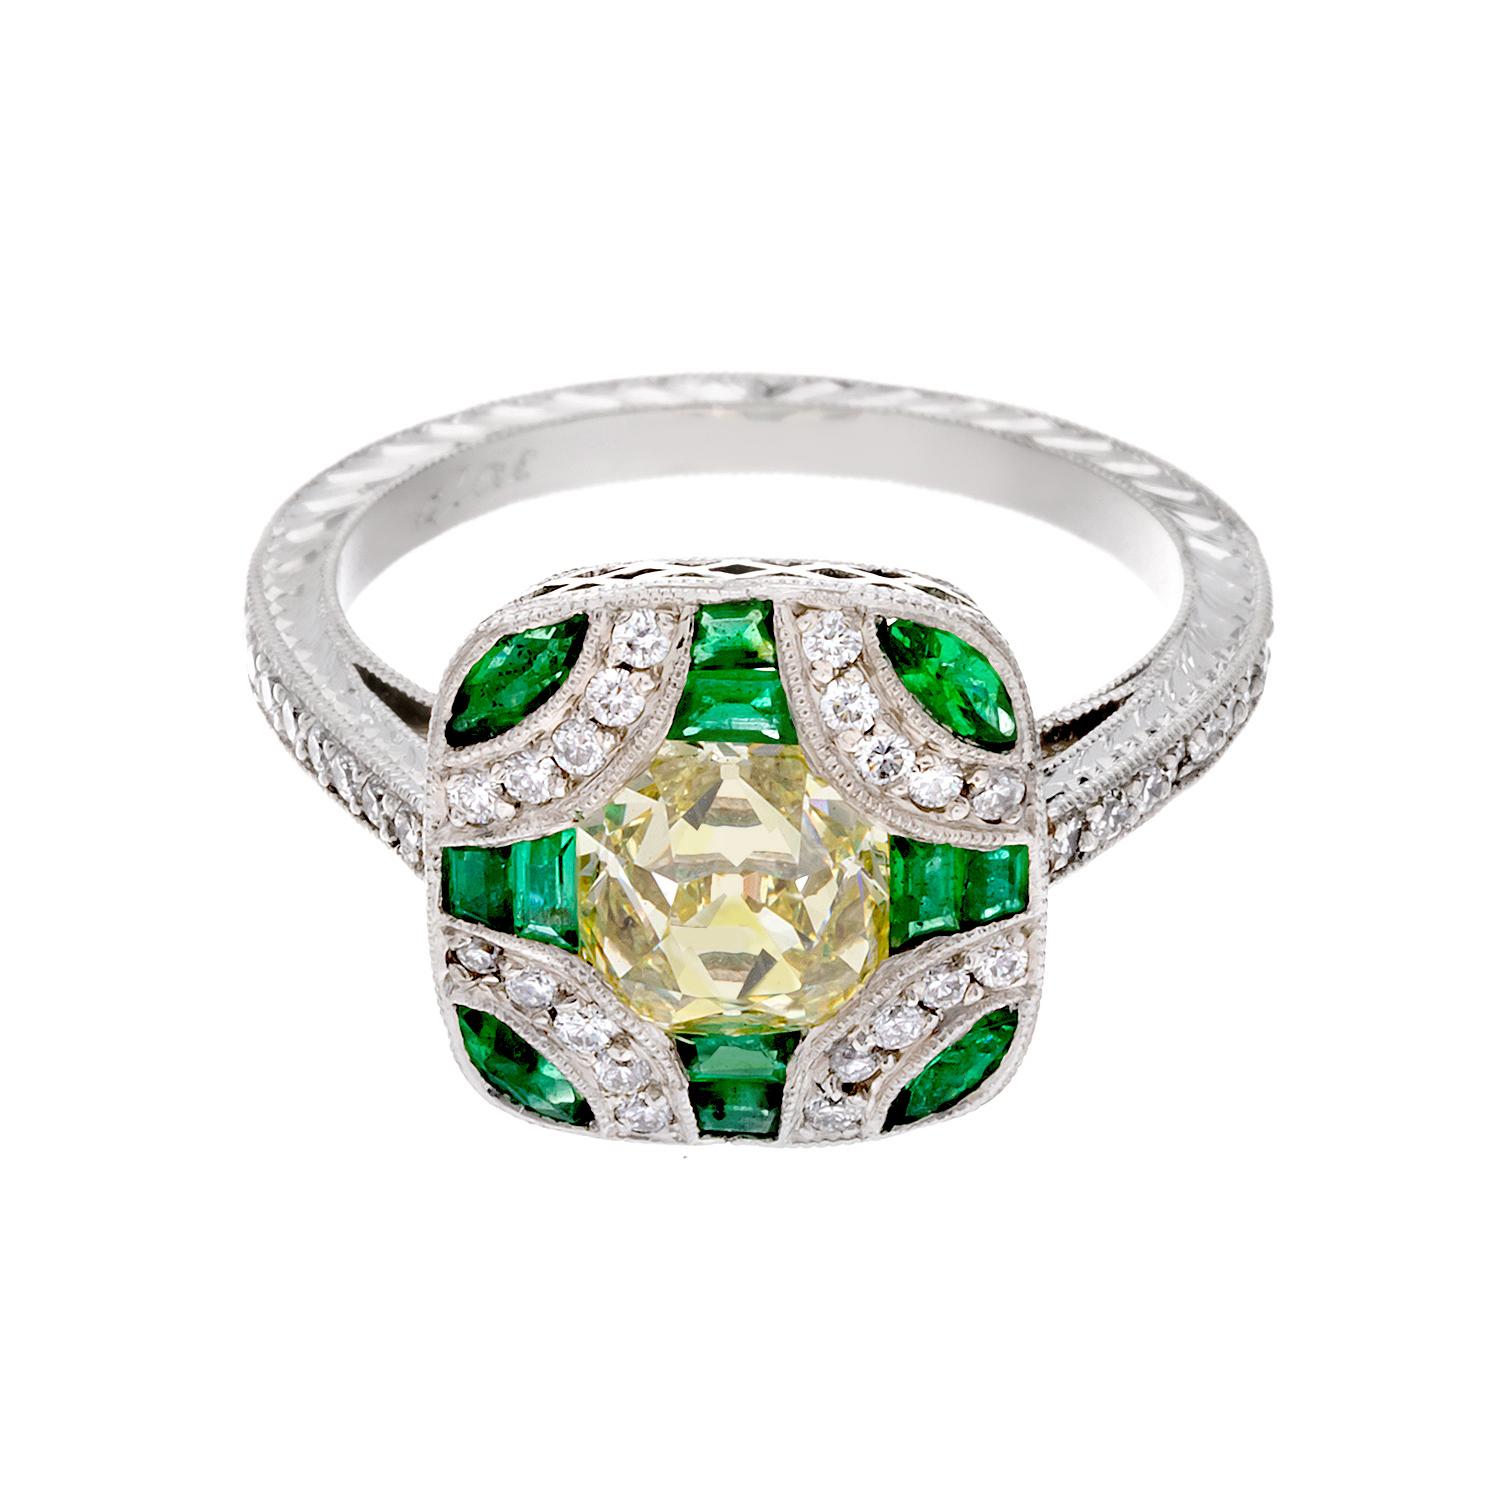 Antique Edwardian Style Fancy Yellow Old Mine Cut Diamond and Emerald Ring For Sale 4